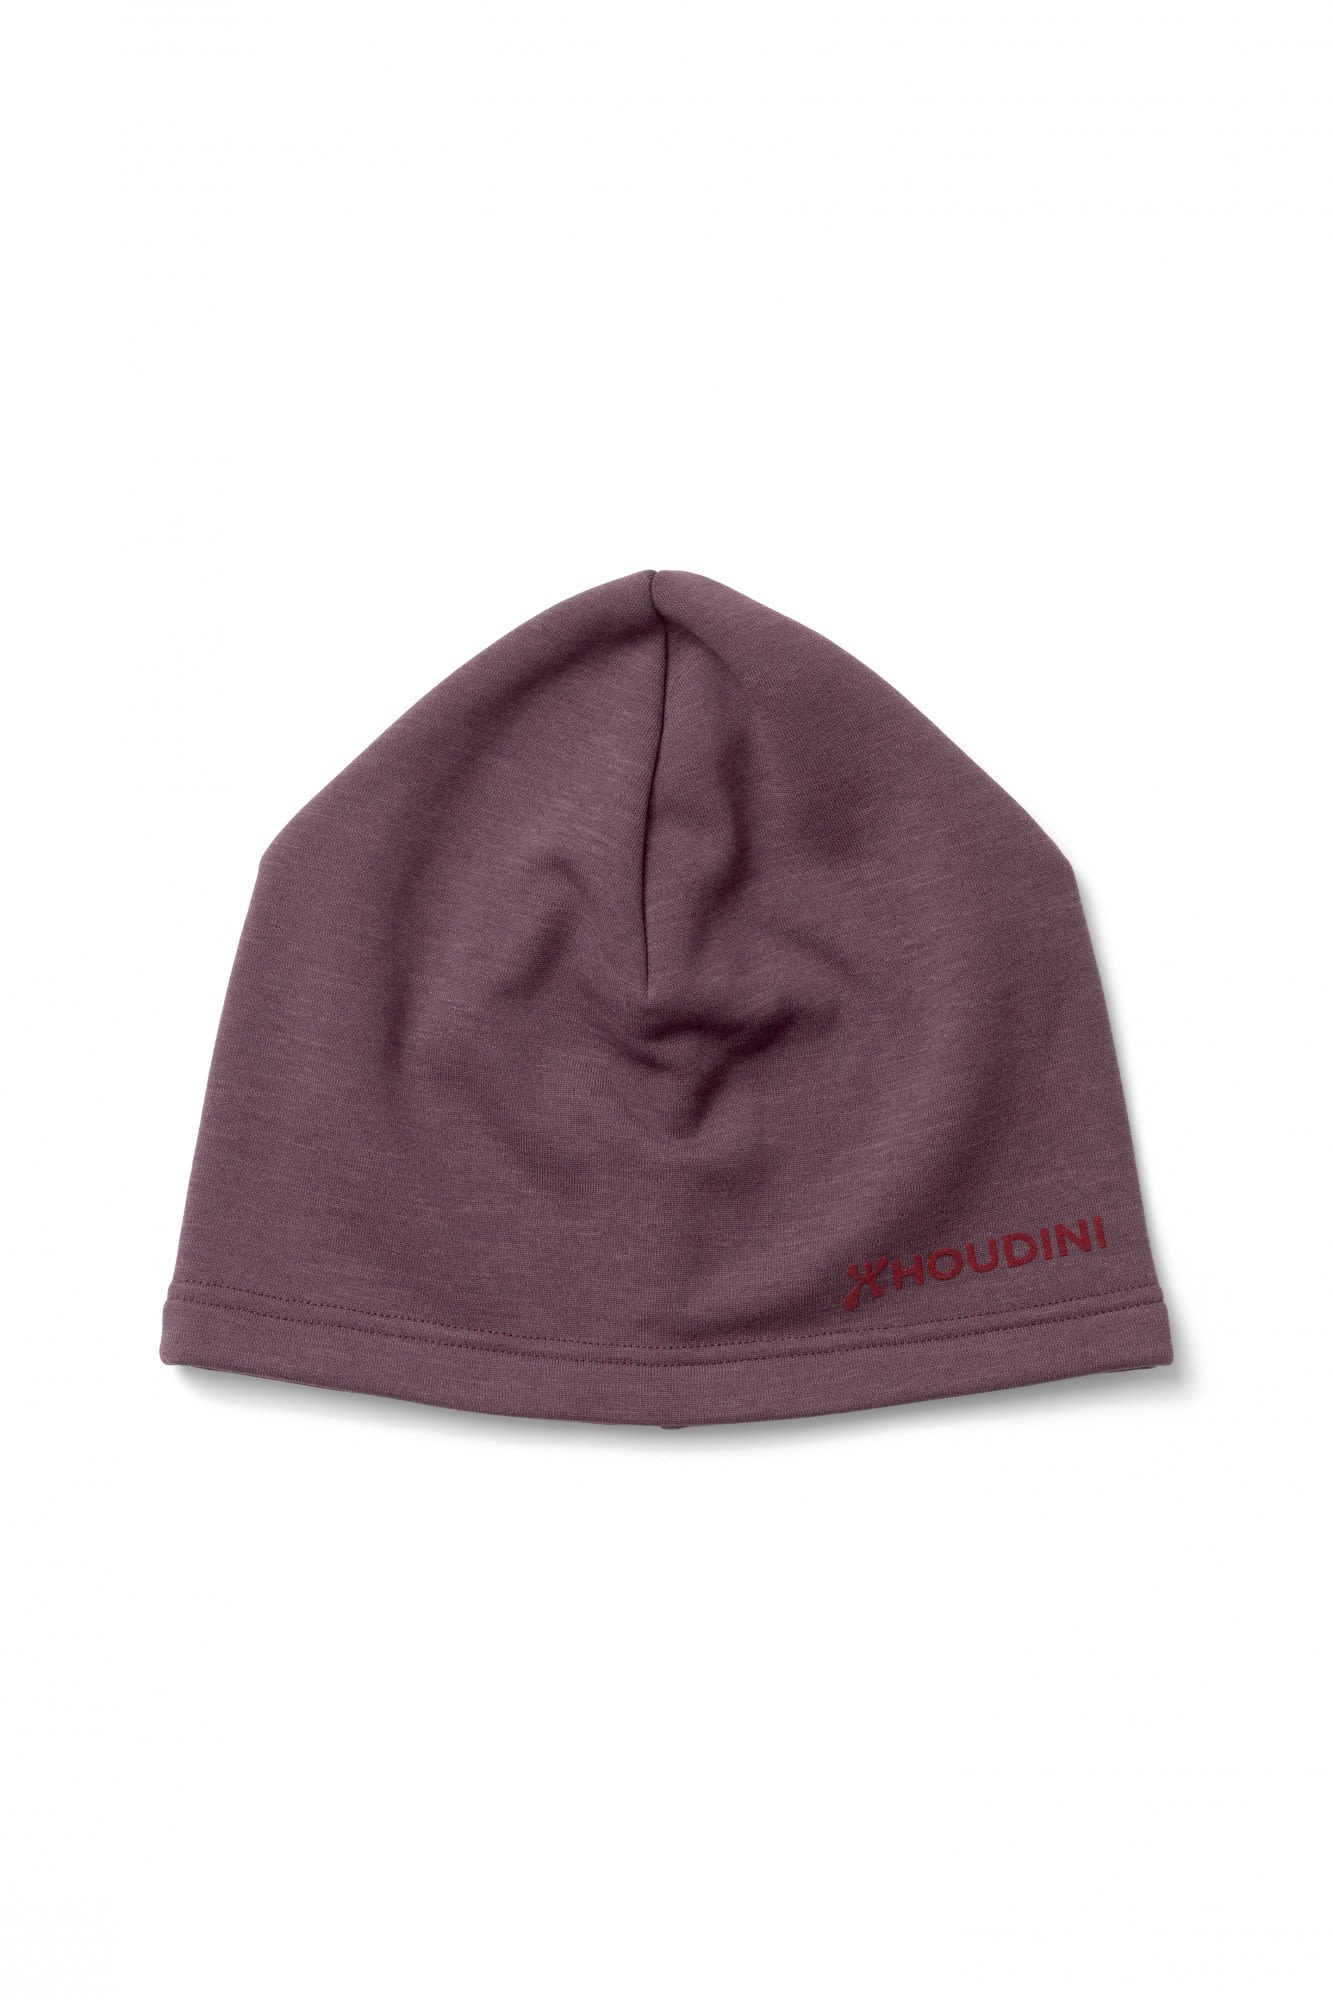 Houdini Outright Hat Rot- Polartec(R) Kopfbedeckungen- Grsse M - Farbe Red Illusion